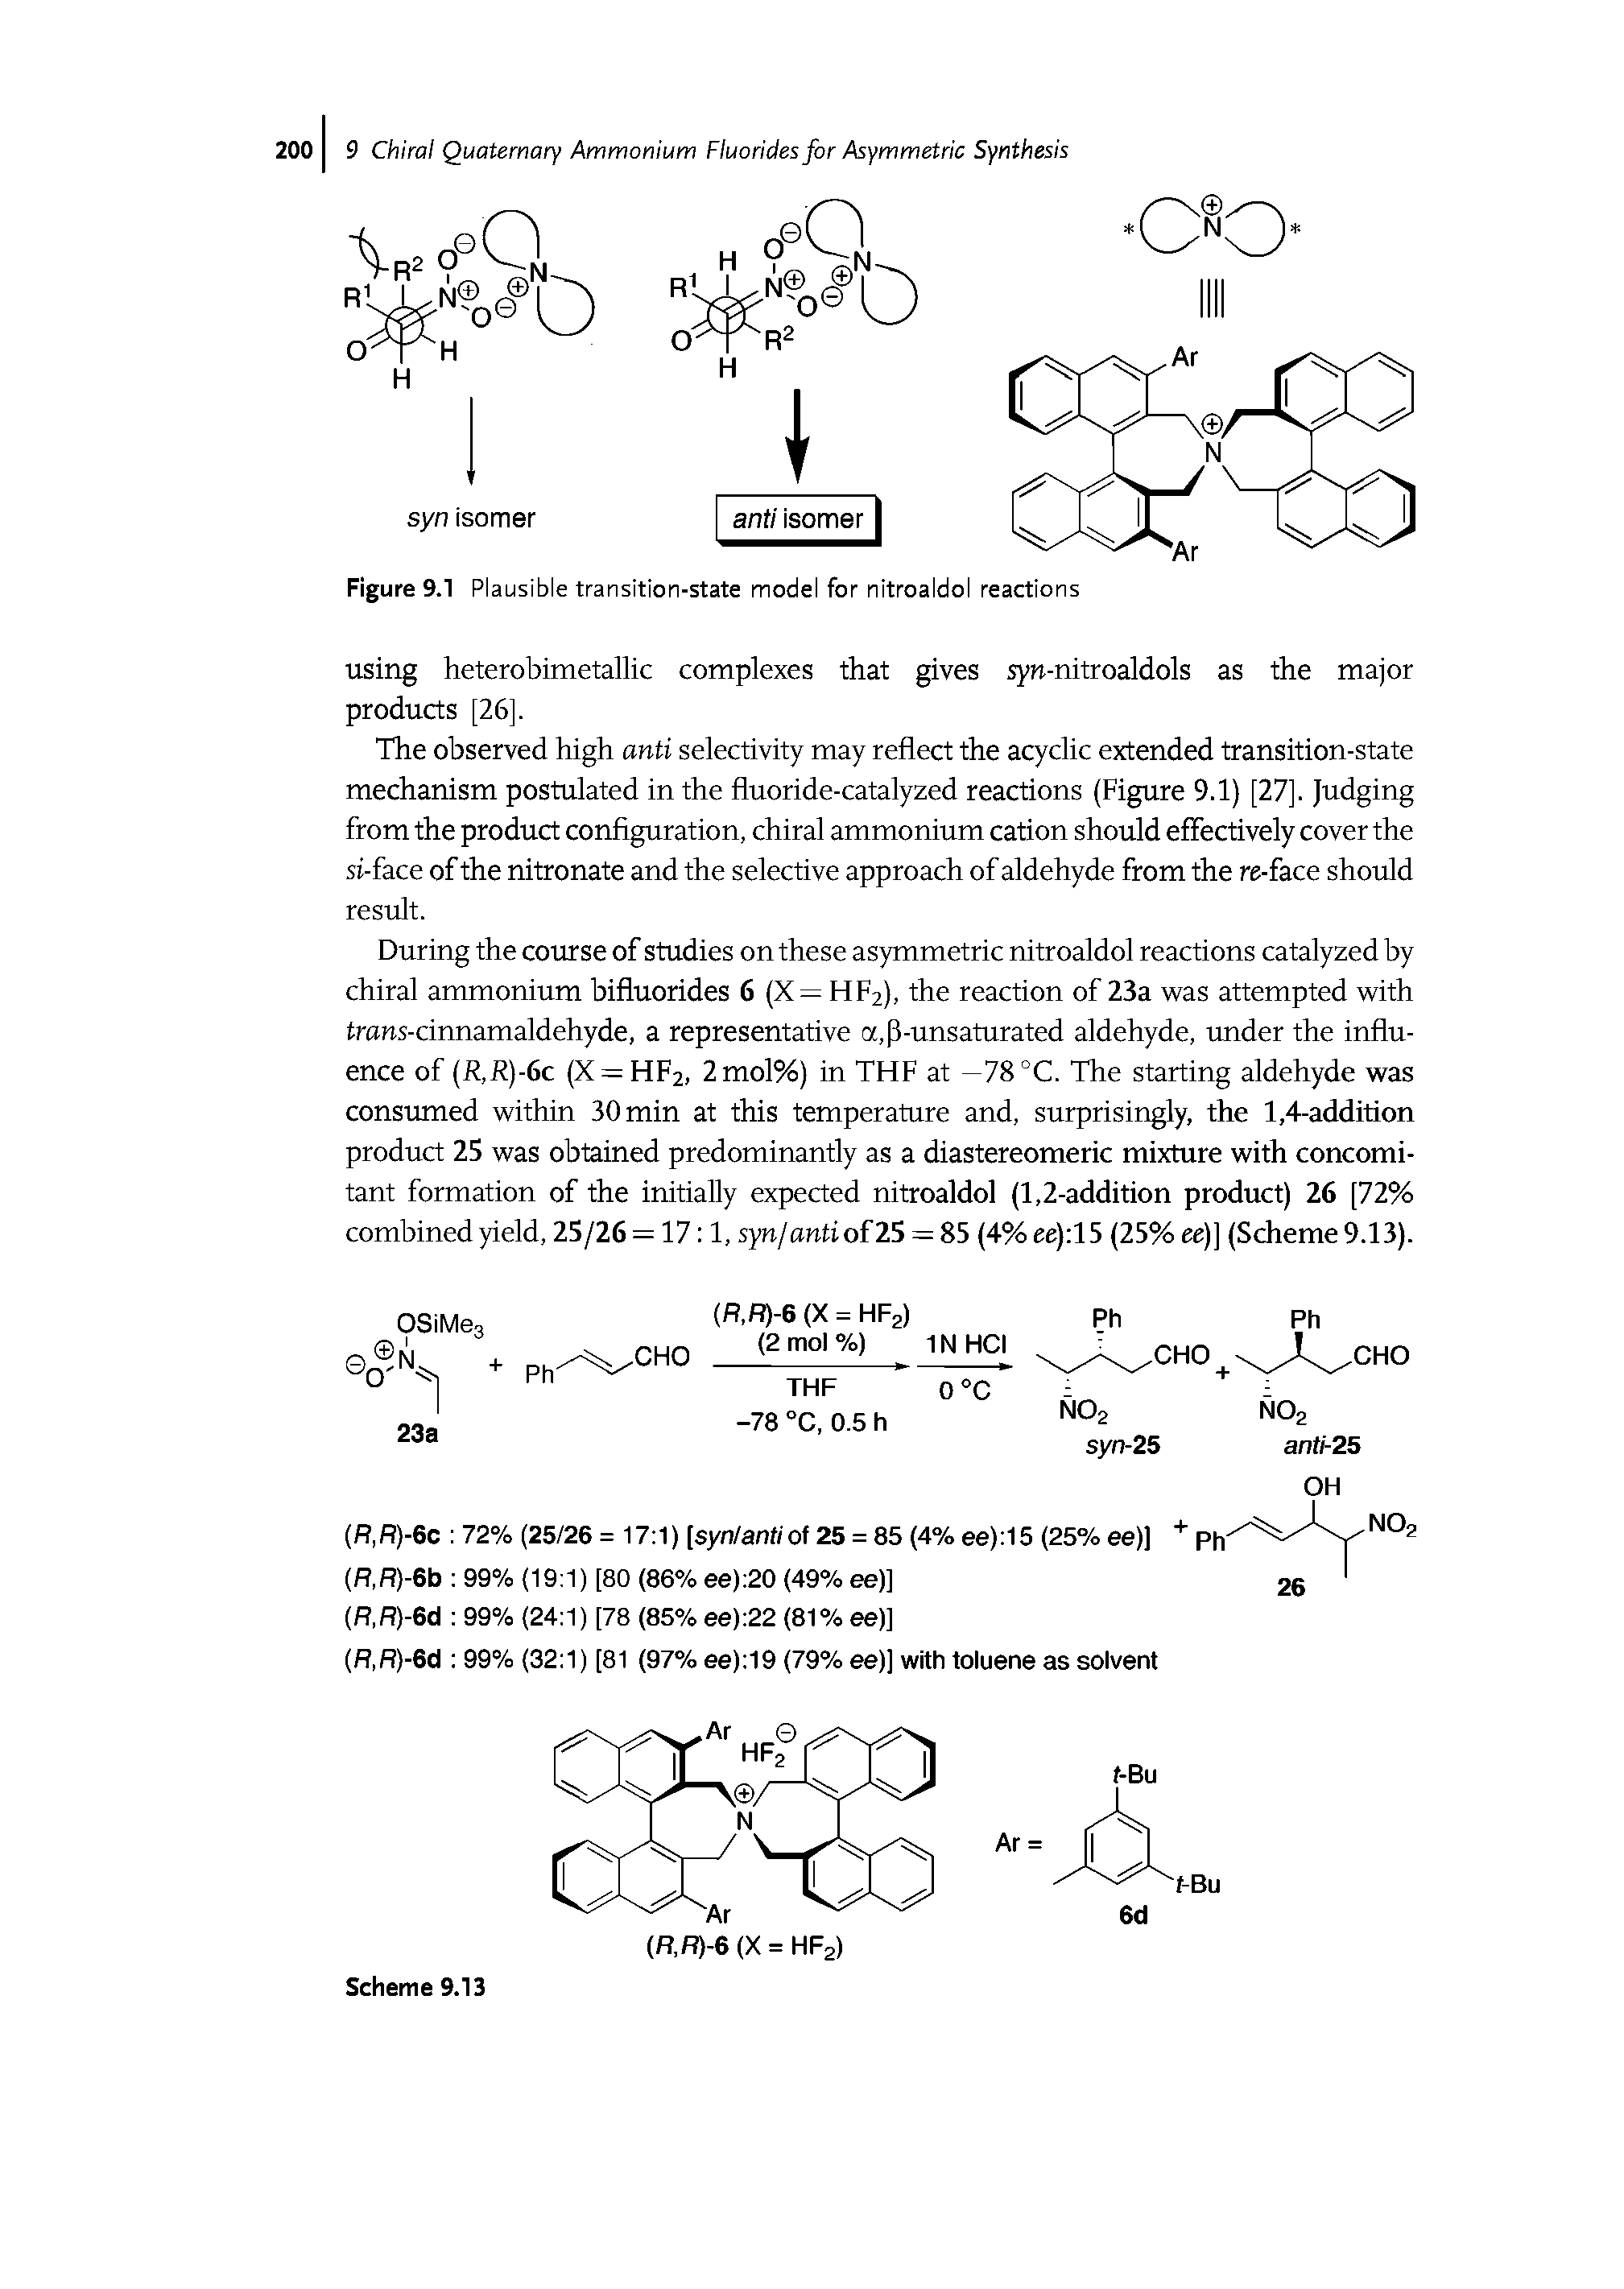 Figure 9.1 Plausible transition-state model for nitroaldol reactions...